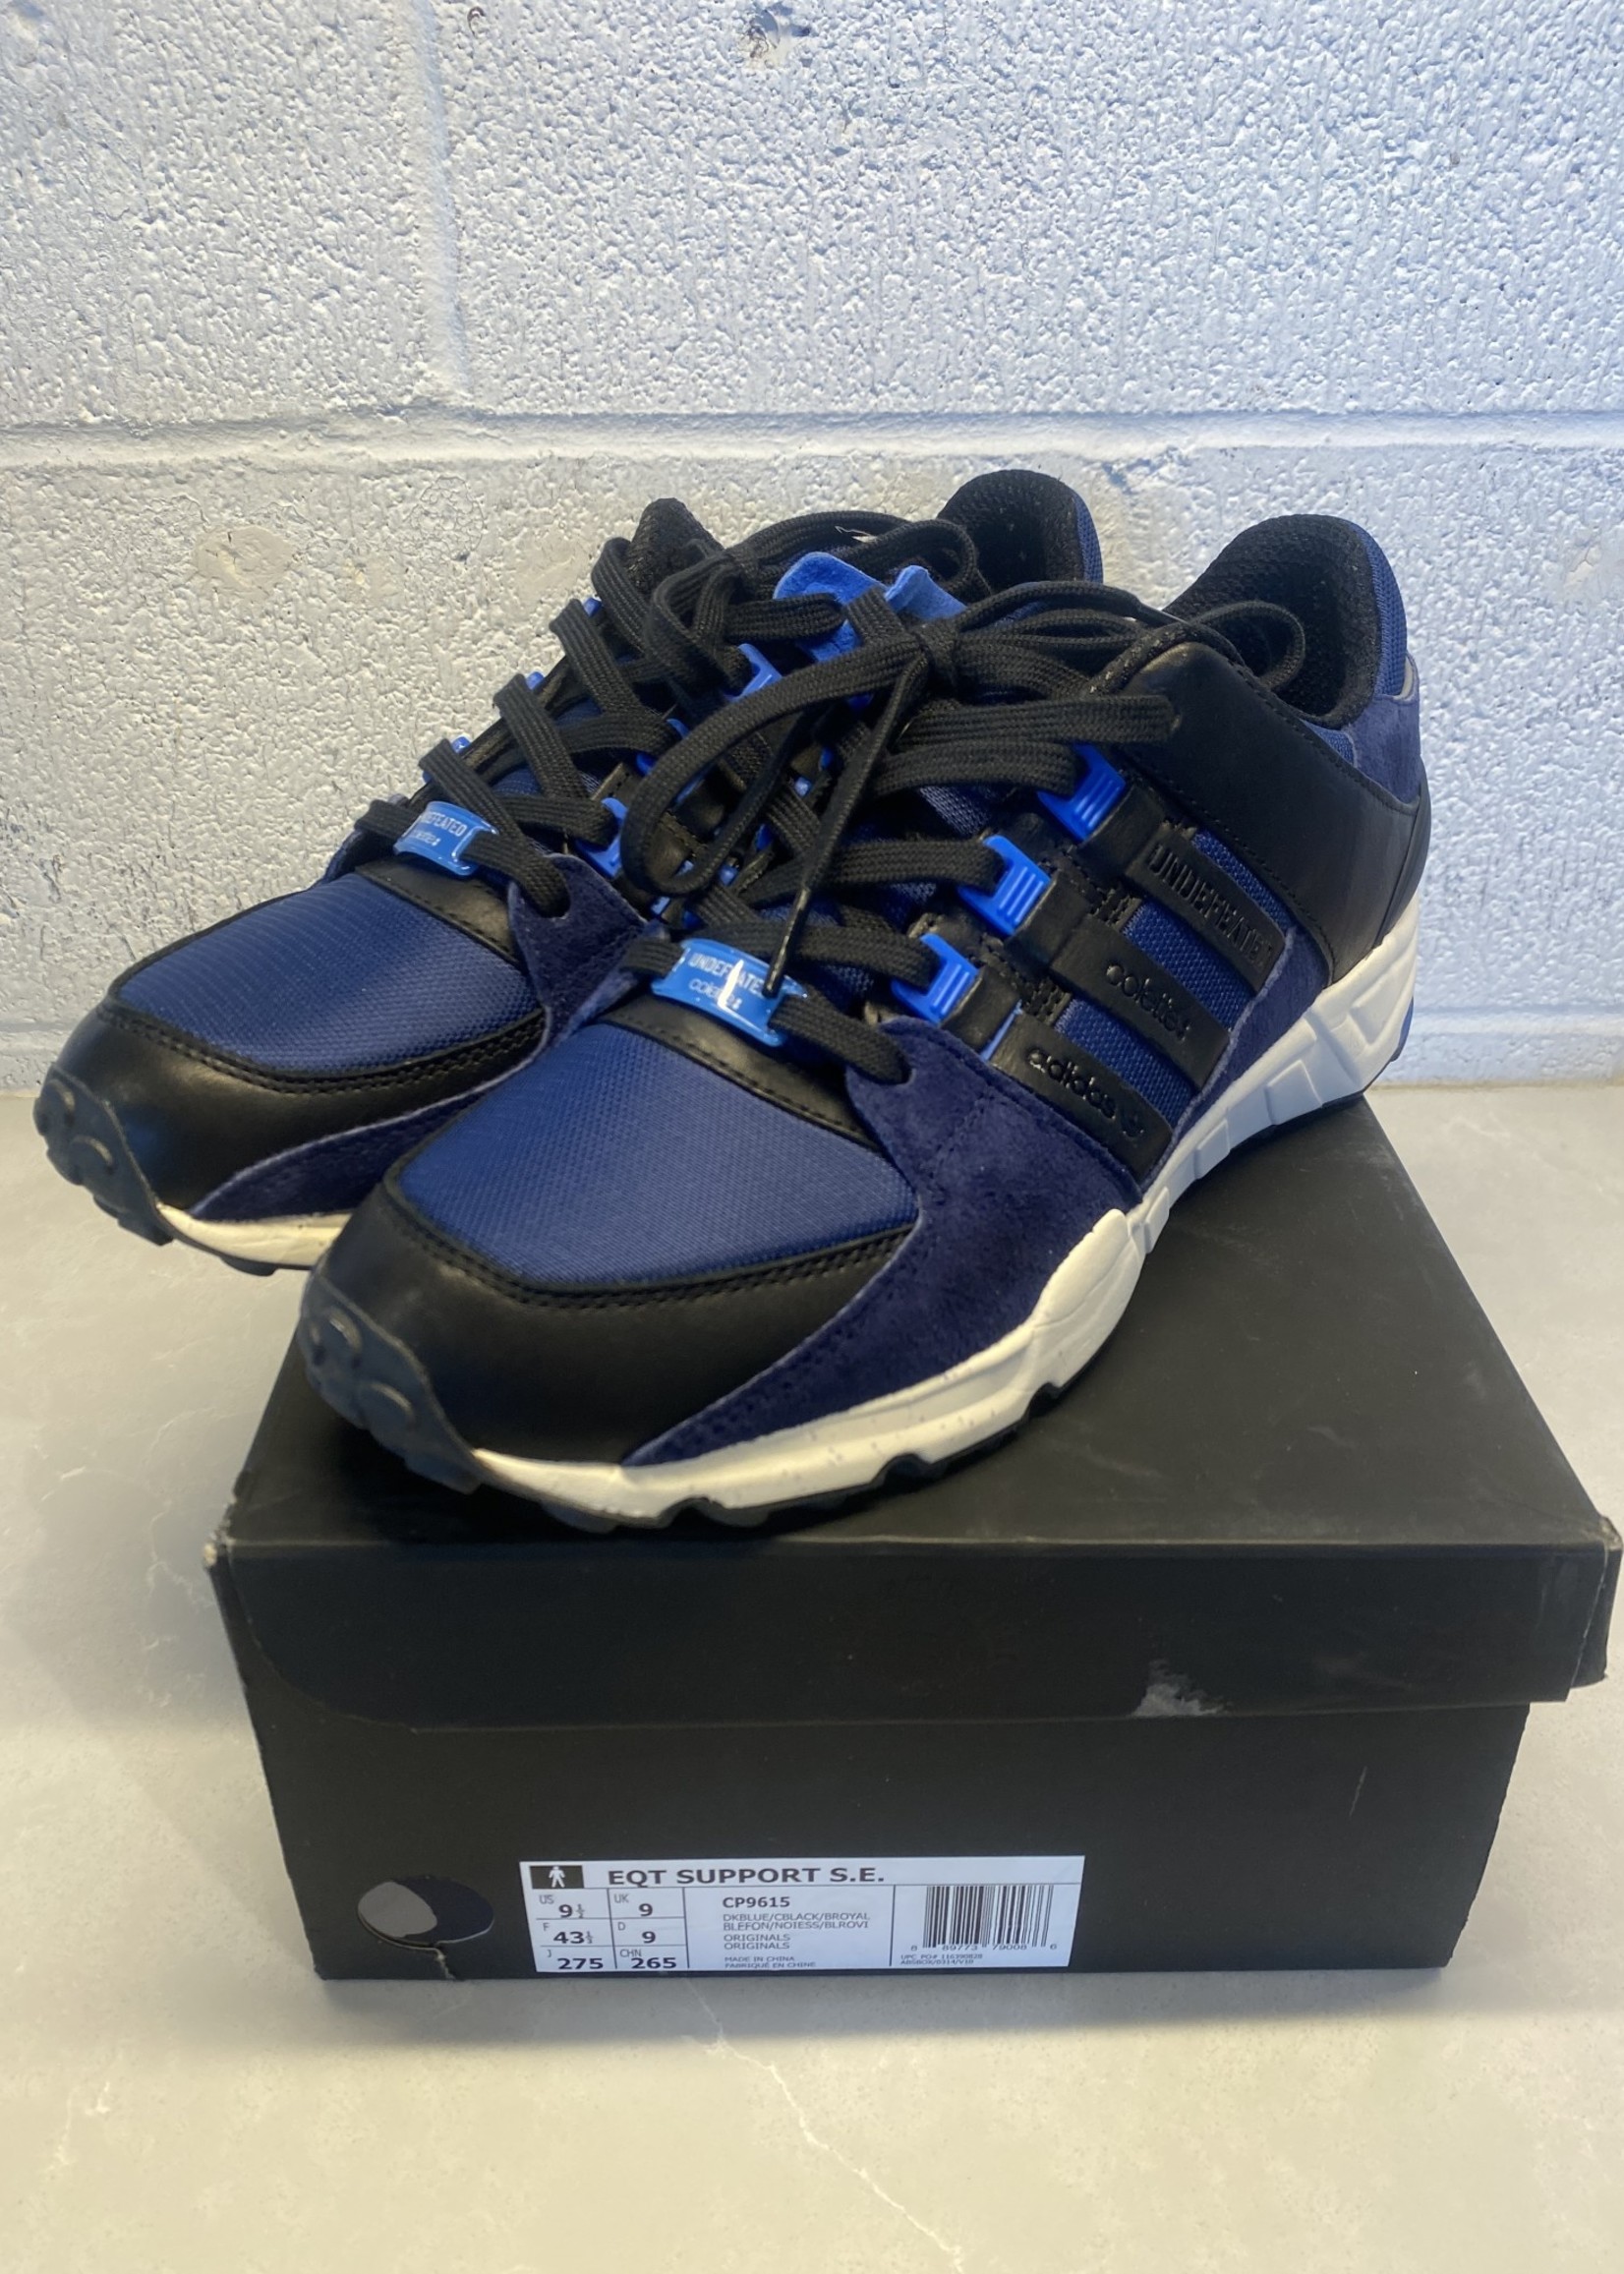 Adidas Colette x Undefeated x EQT Sneakers 9.5